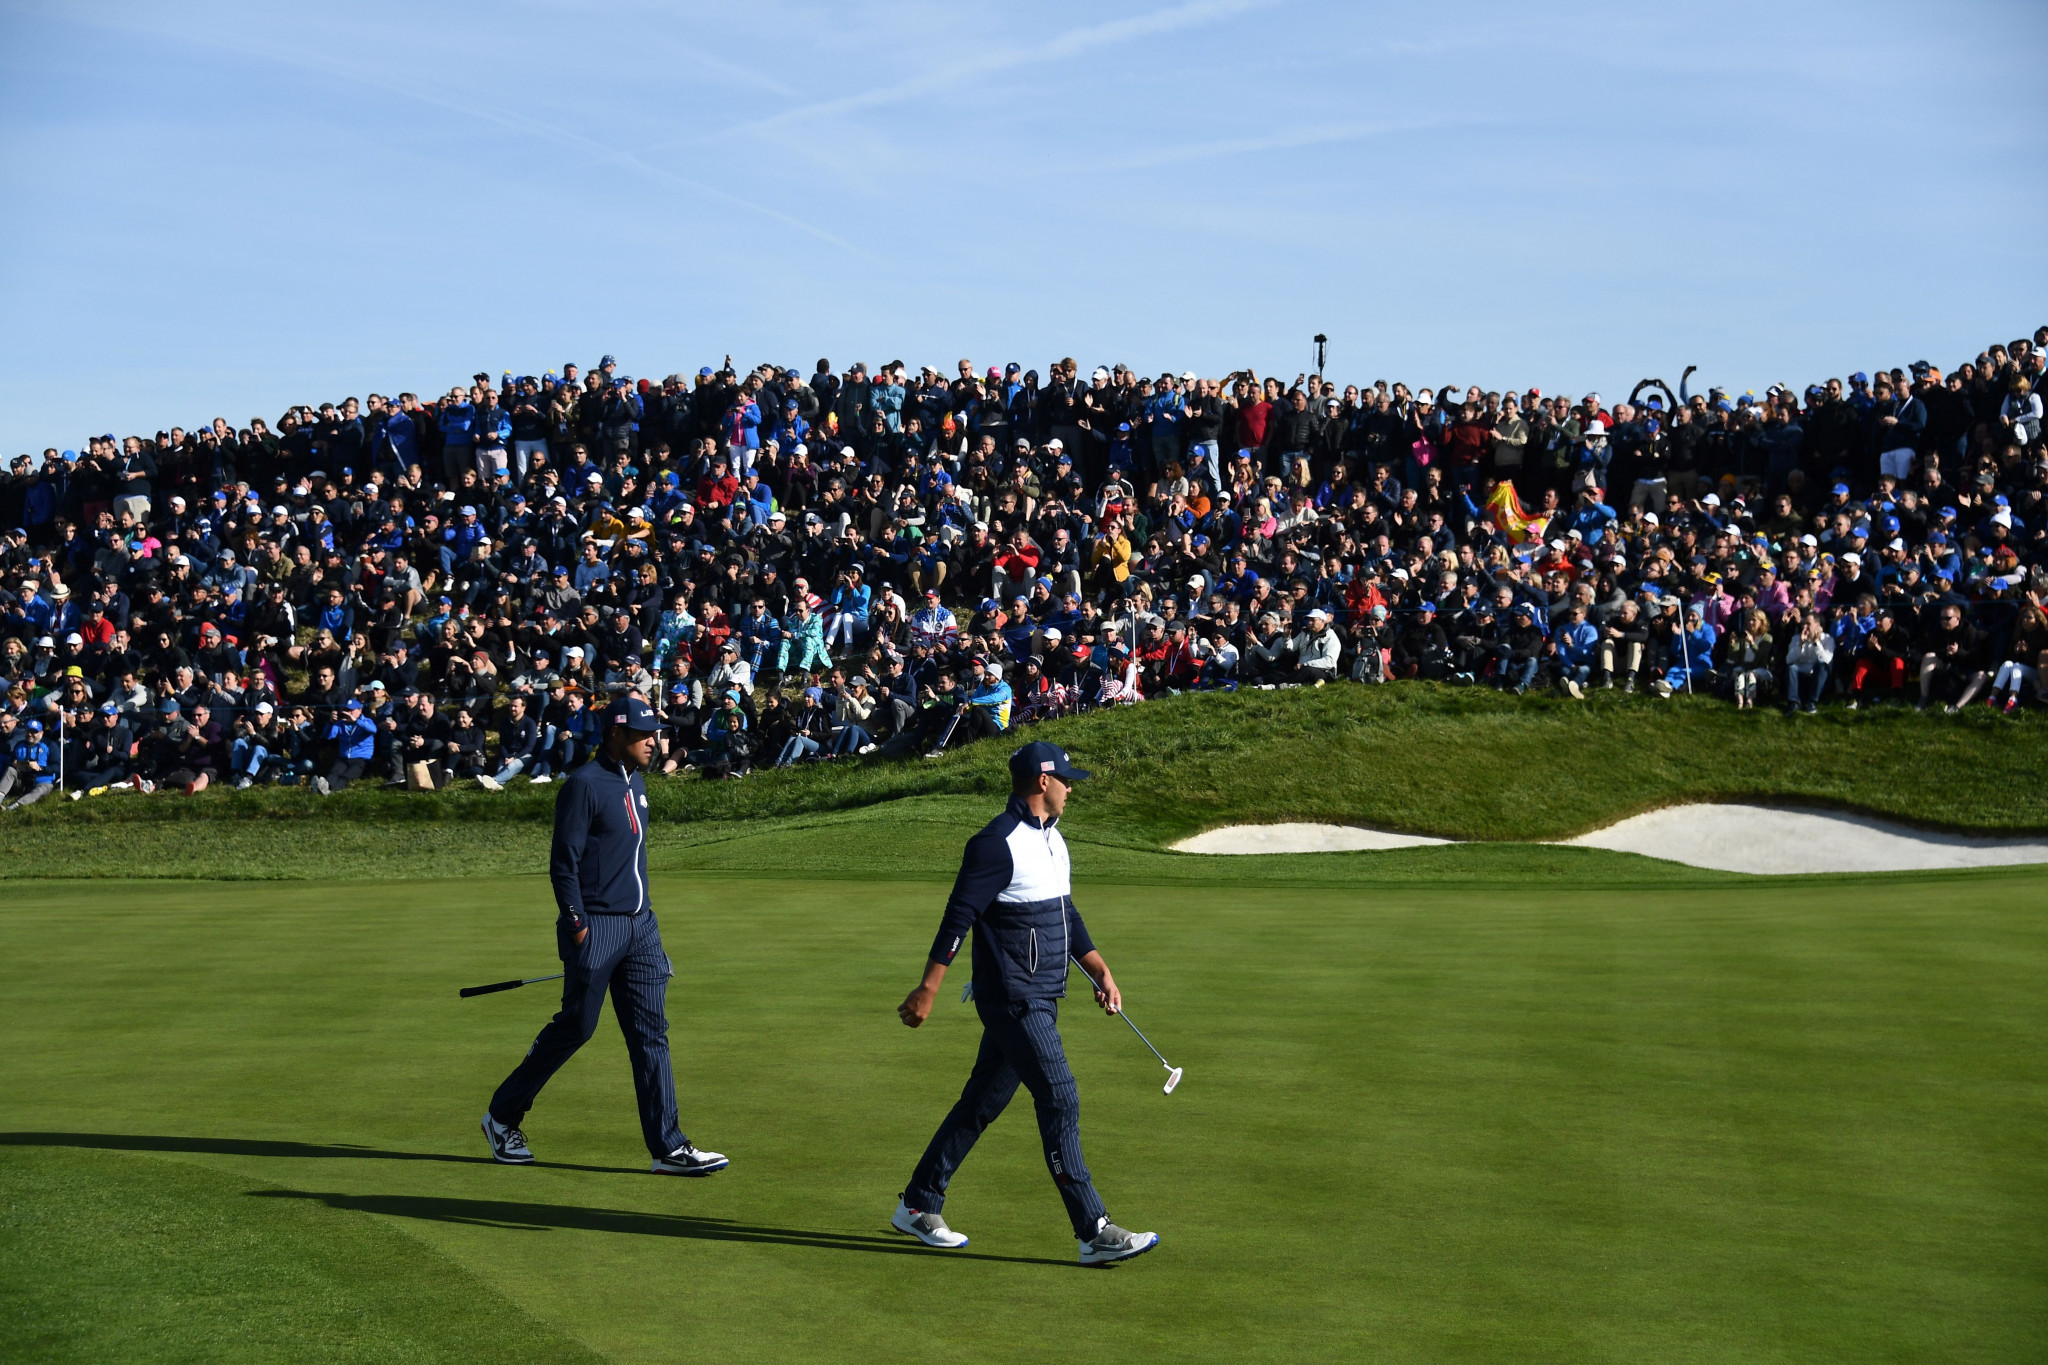 France receives €235 million economic benefit from staging Ryder Cup in